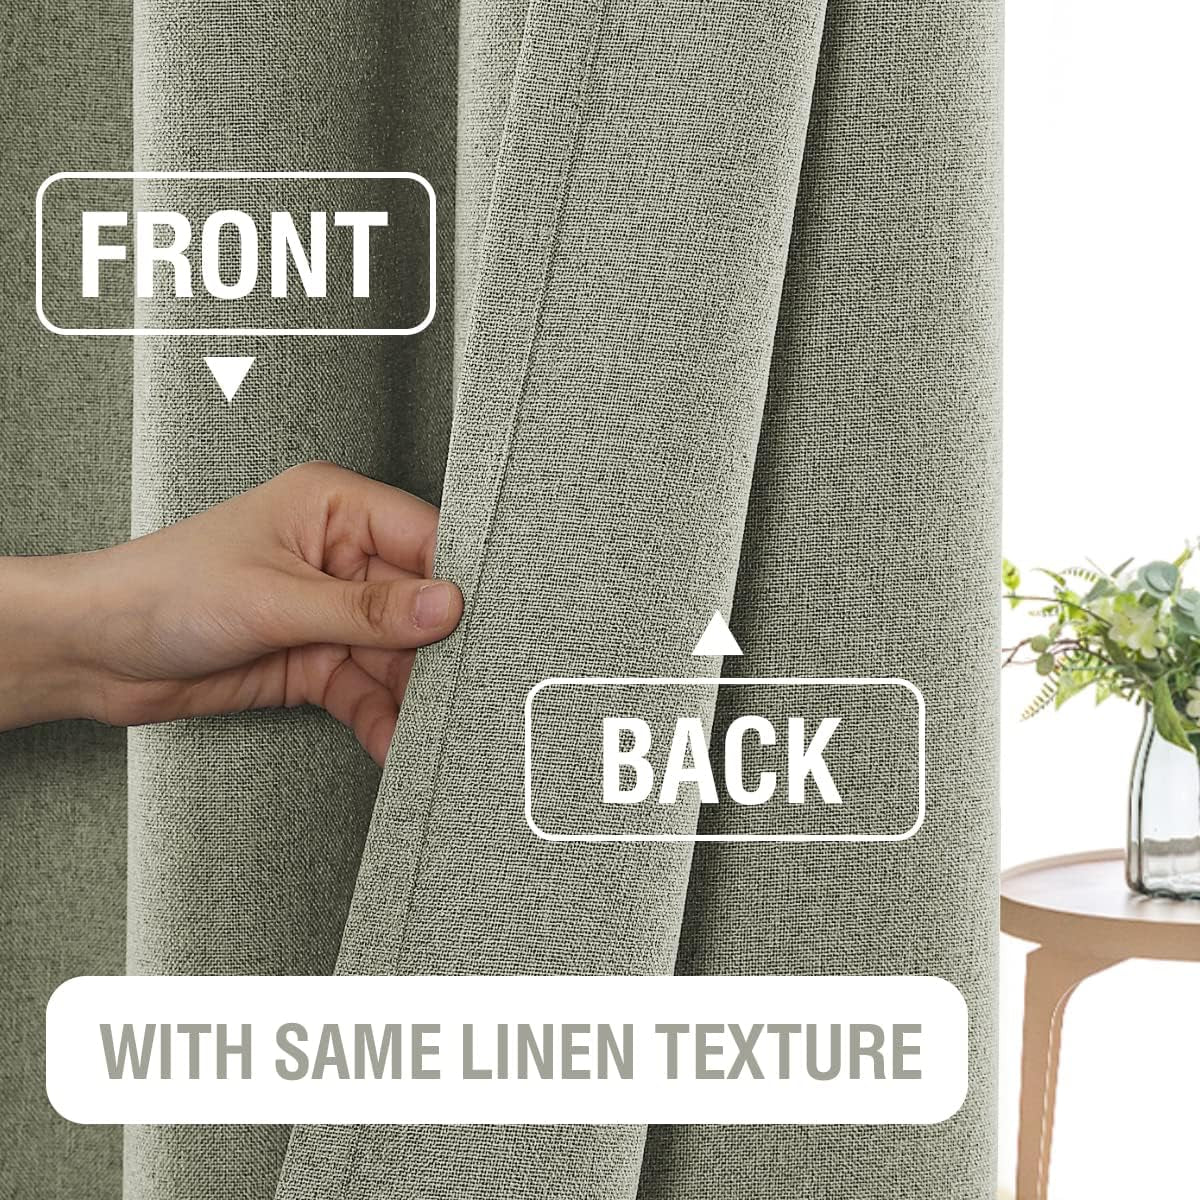 H.VERSAILTEX 100% Blackout Linen Look Curtains Thermal Insulated Curtains for Living Room Textured Burlap Drapes for Bedroom Grommet Linen Noise Blocking Curtains 42 X 84 Inch, 2 Panels - Sage  H.VERSAILTEX   